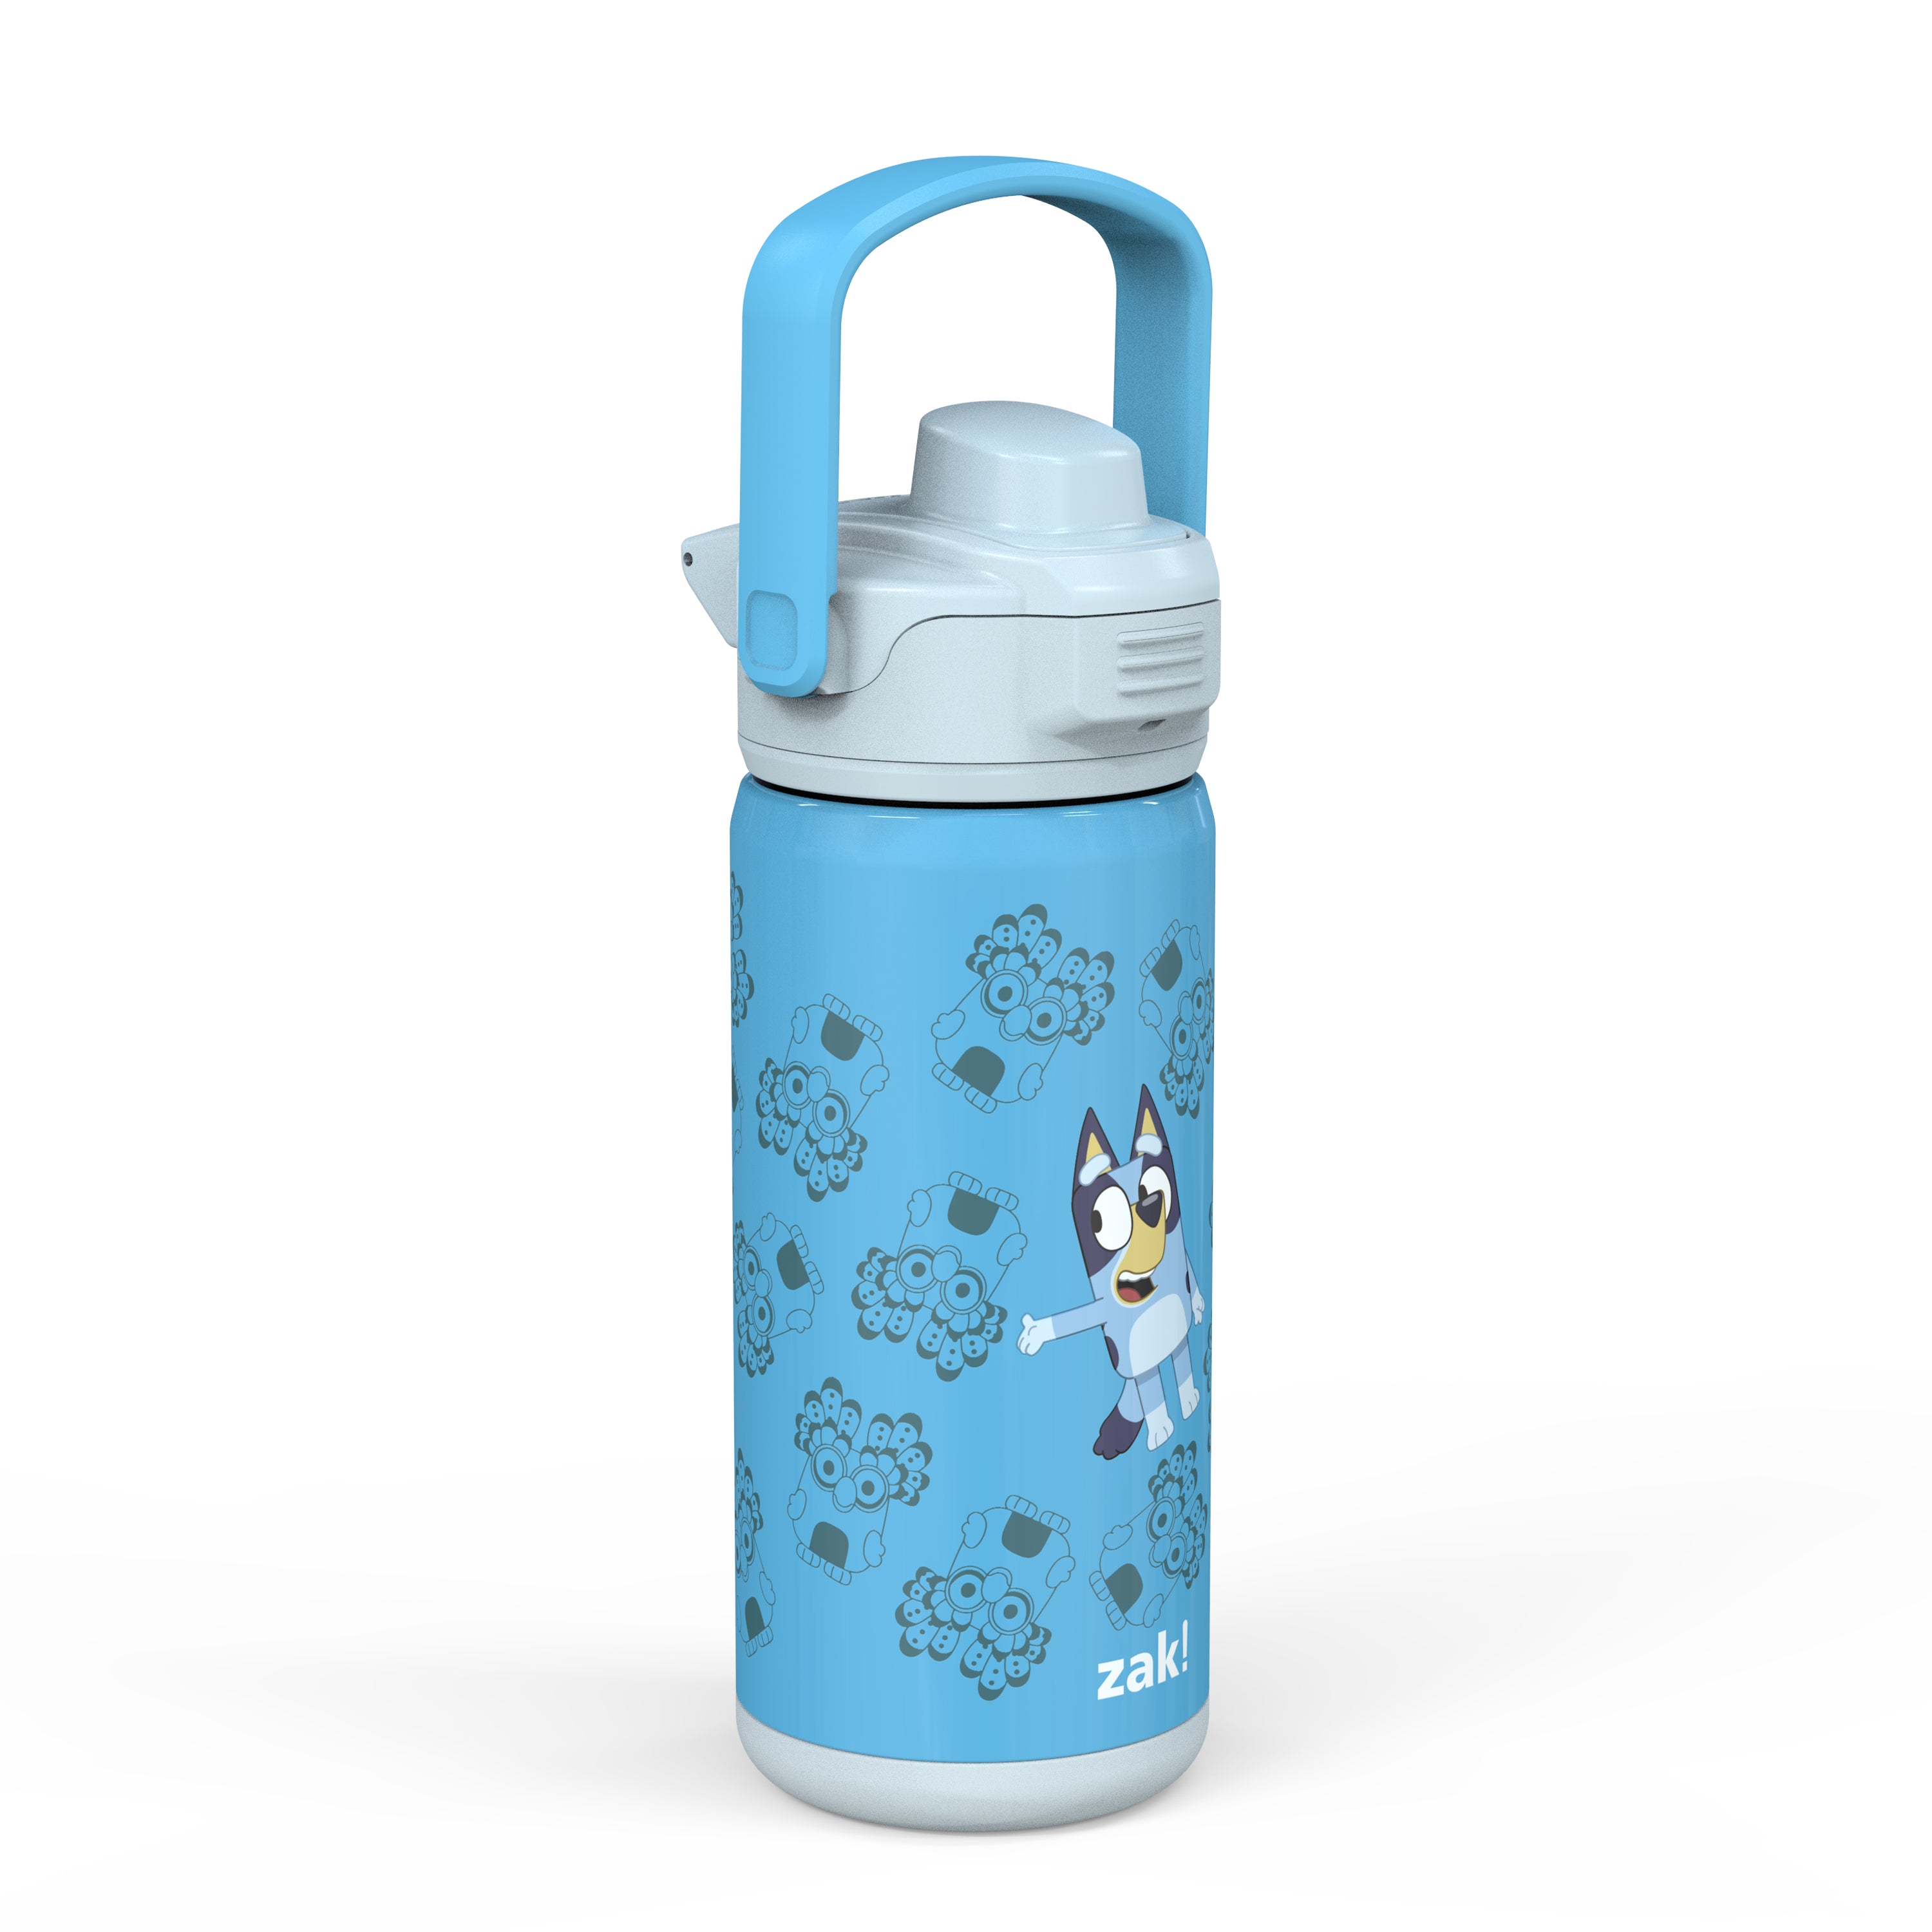 Kids Bottle Double Wall Insulated Stainless Steel - Blue